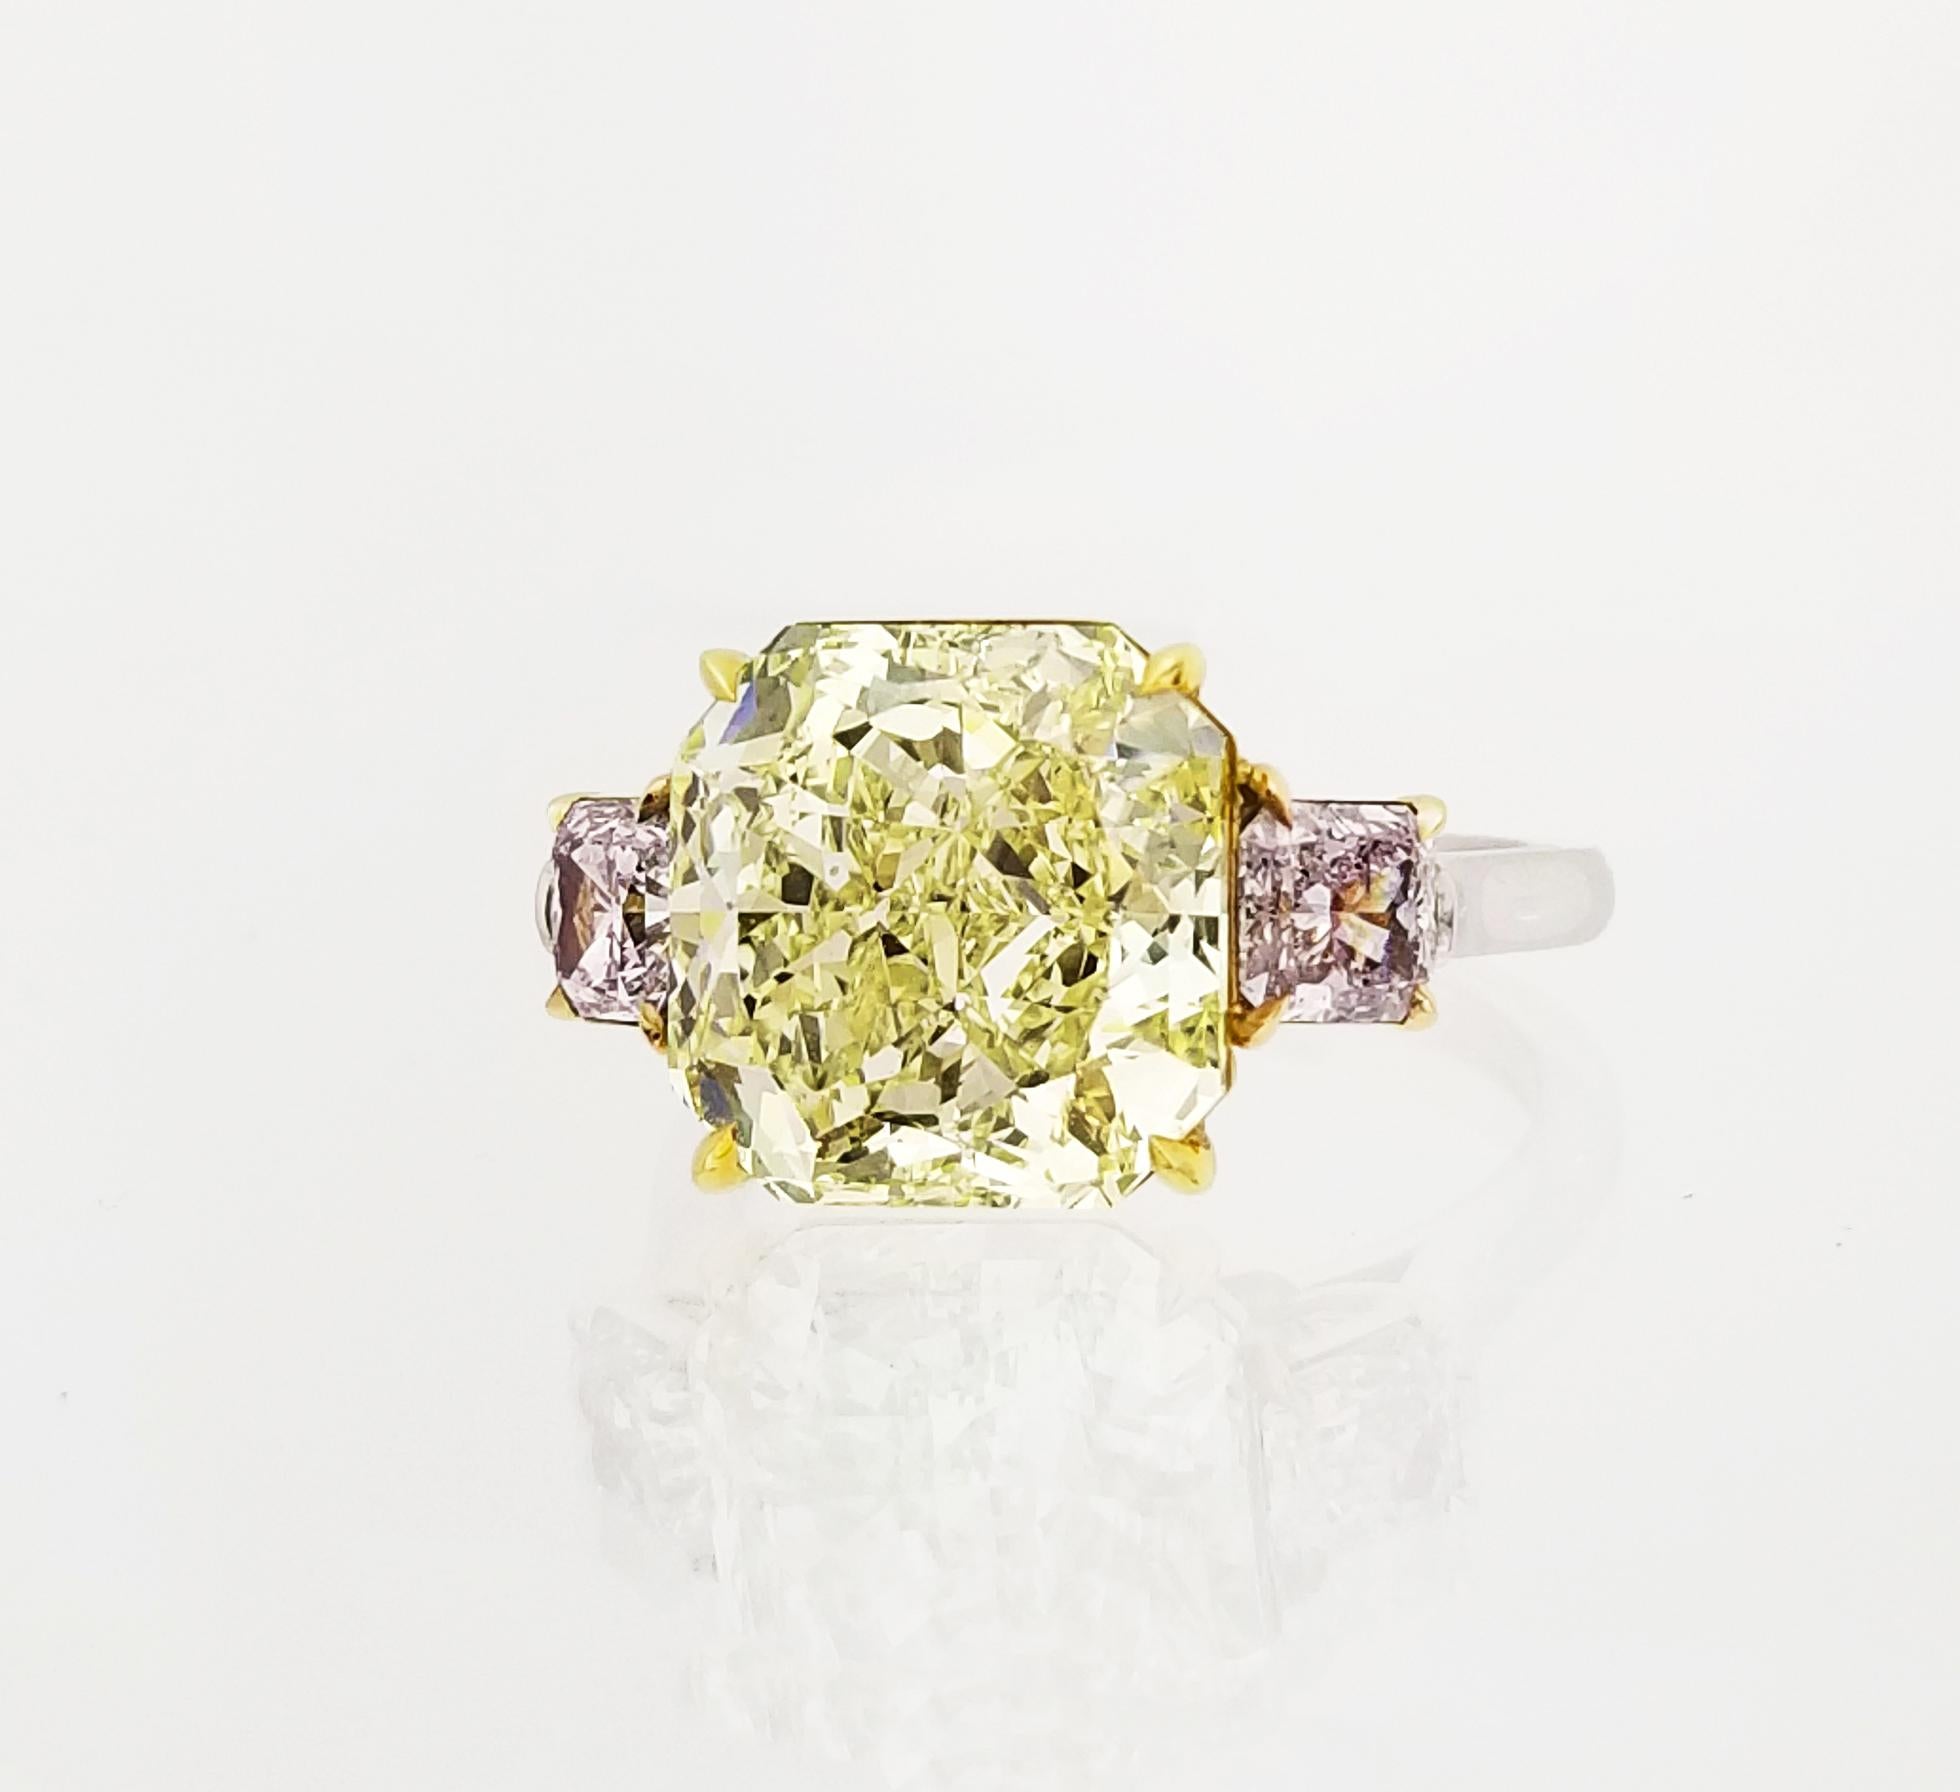 From Scarselli, this extraordinary ring features a large almost 7 carat Fancy Yellow Radiant cut diamond GIA certified with excellent clarity (see certificate picture for more detailed information of the stone).  The Yellow diamond is set off with